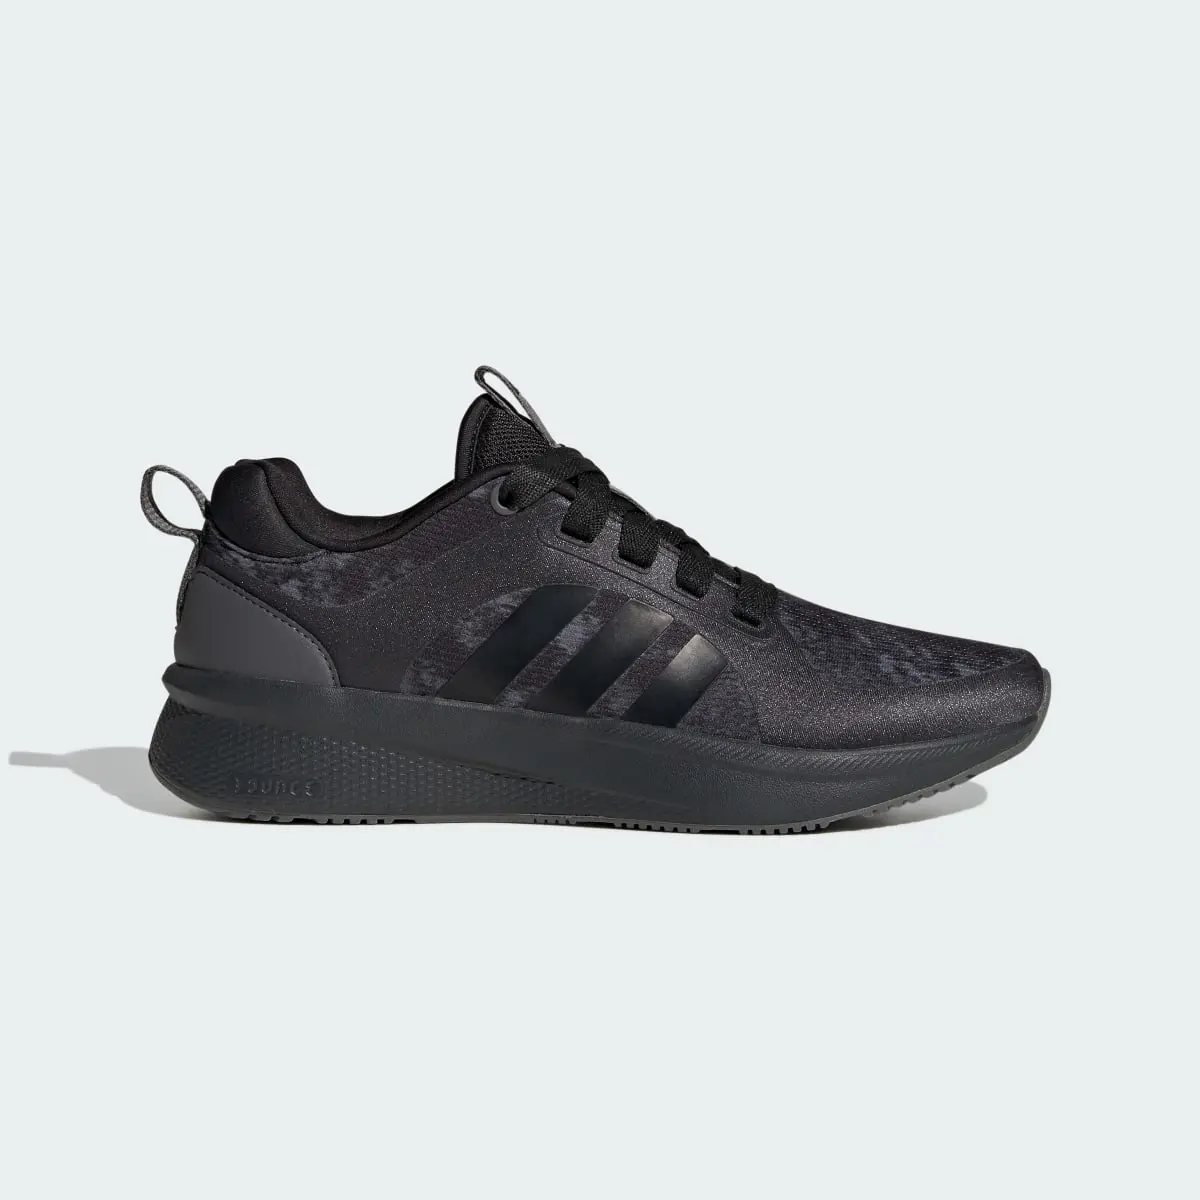 Adidas Edge Lux 6.0 Shoes. 2